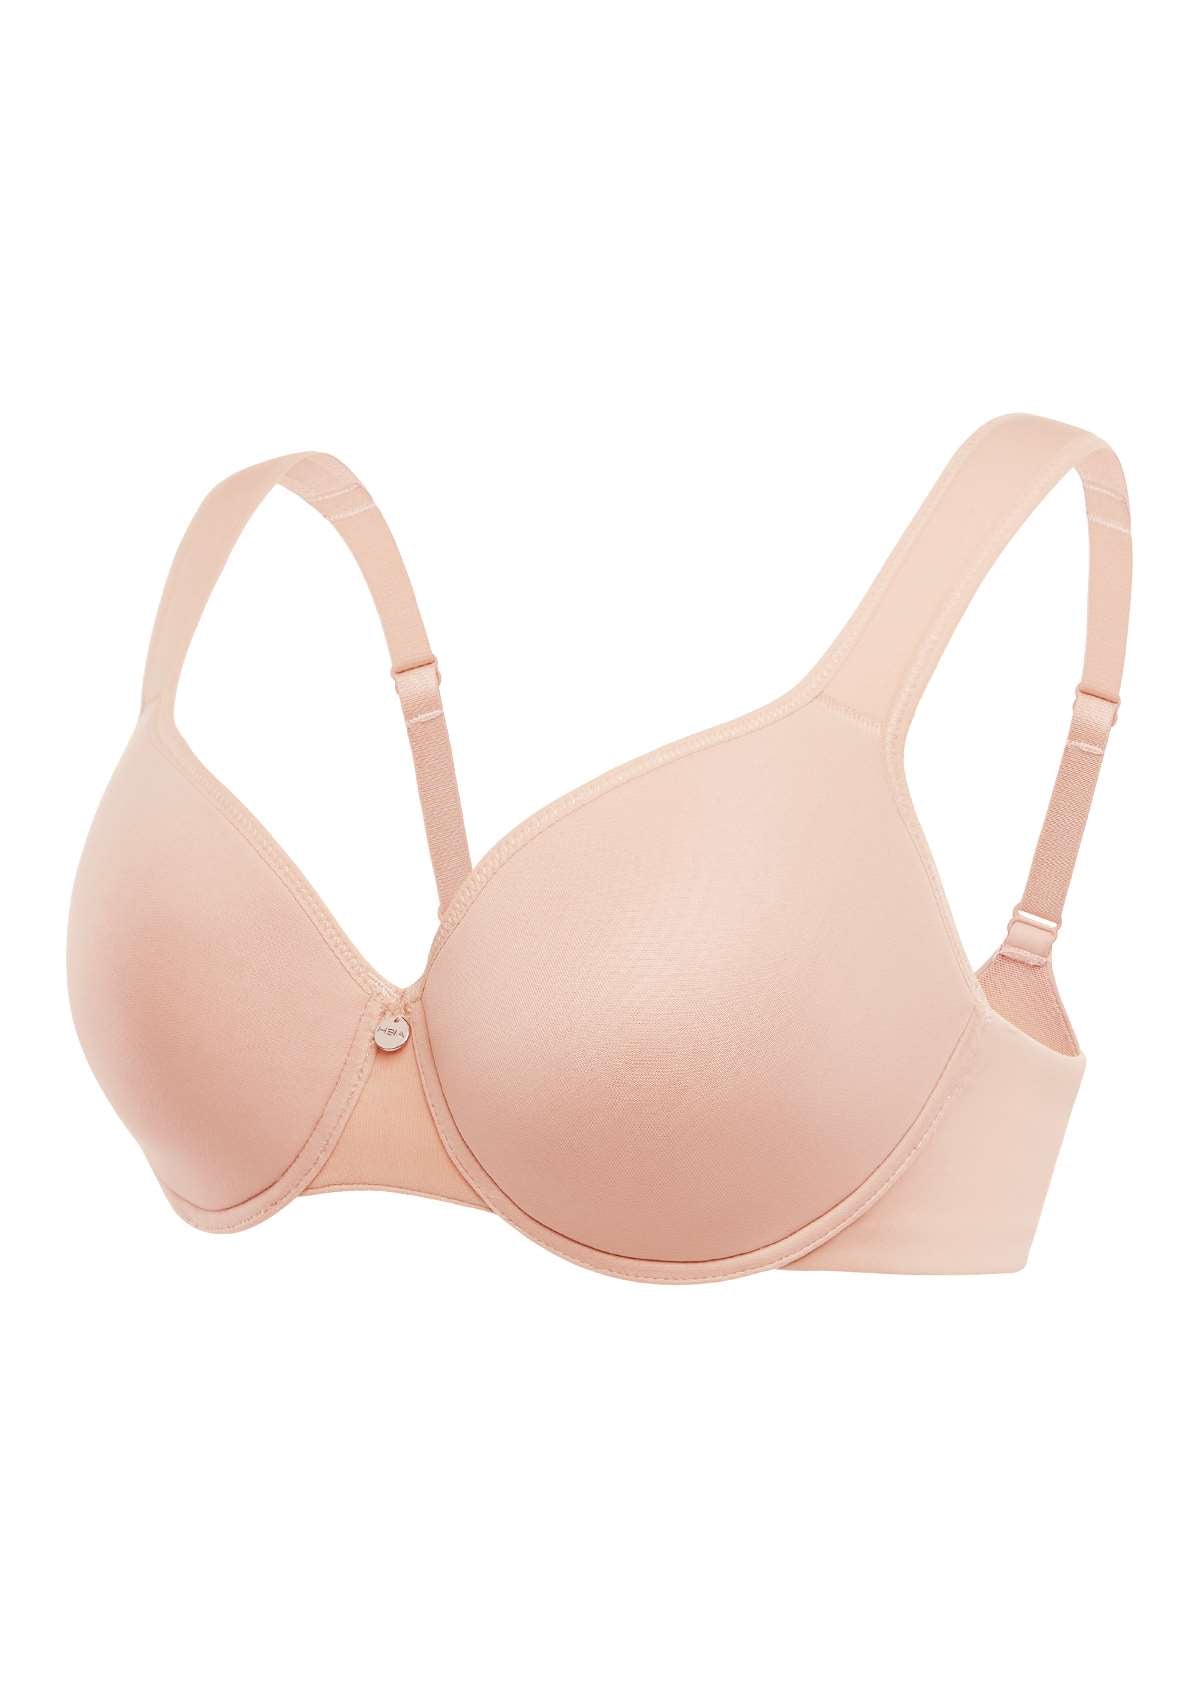 HSIA Patricia Smooth Classic T-shirt Lightly Padded Minimizer Bra - Light Pink / 44 / D